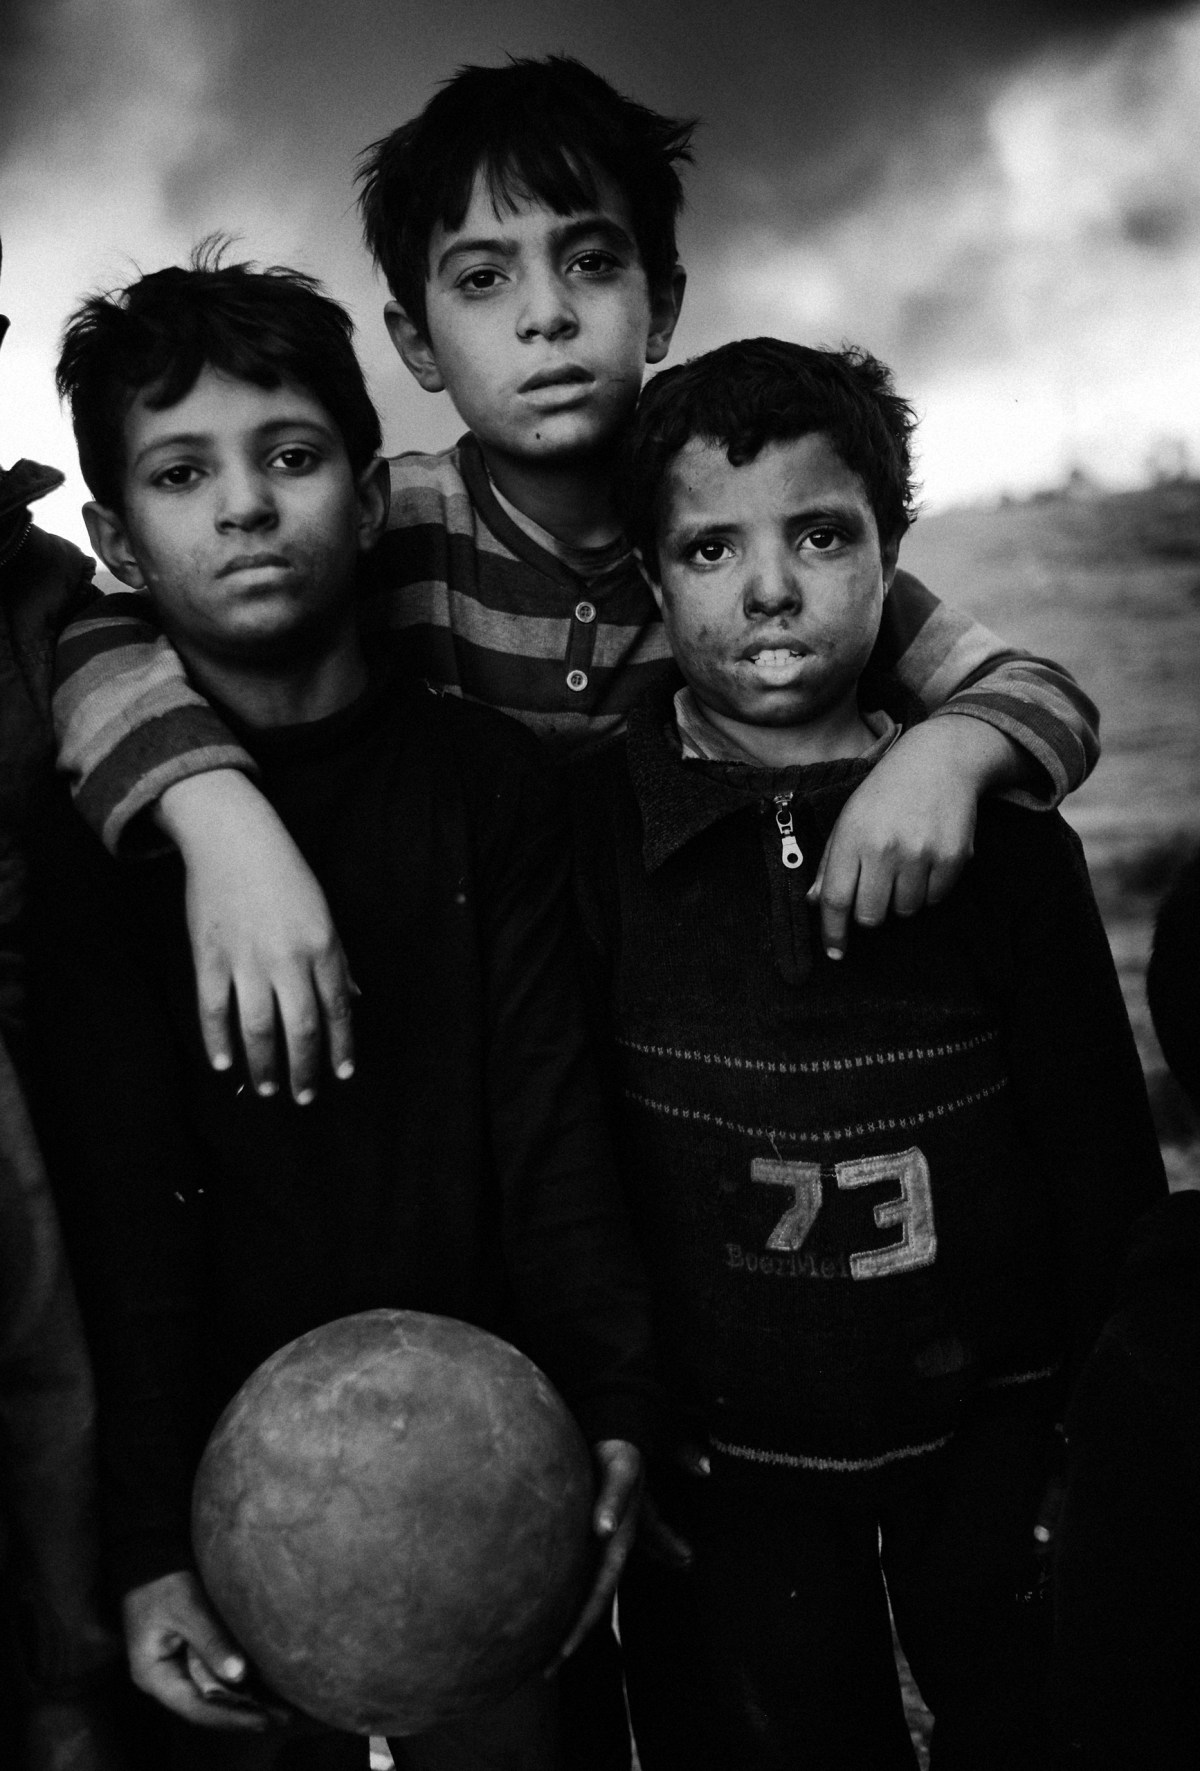 three boys at the football pitch in the city Qayyara, south of Mosul. The dense plumes of smoke are emanating from multiple sites about 30 miles (50 km) south of Mosul. The fires were deliberately set by ISIS militants before abandoning the city. The smoke has been persistent over the past three months, blotting out the sun hours before nightfall and creating major health issue for mainly the children in the area.